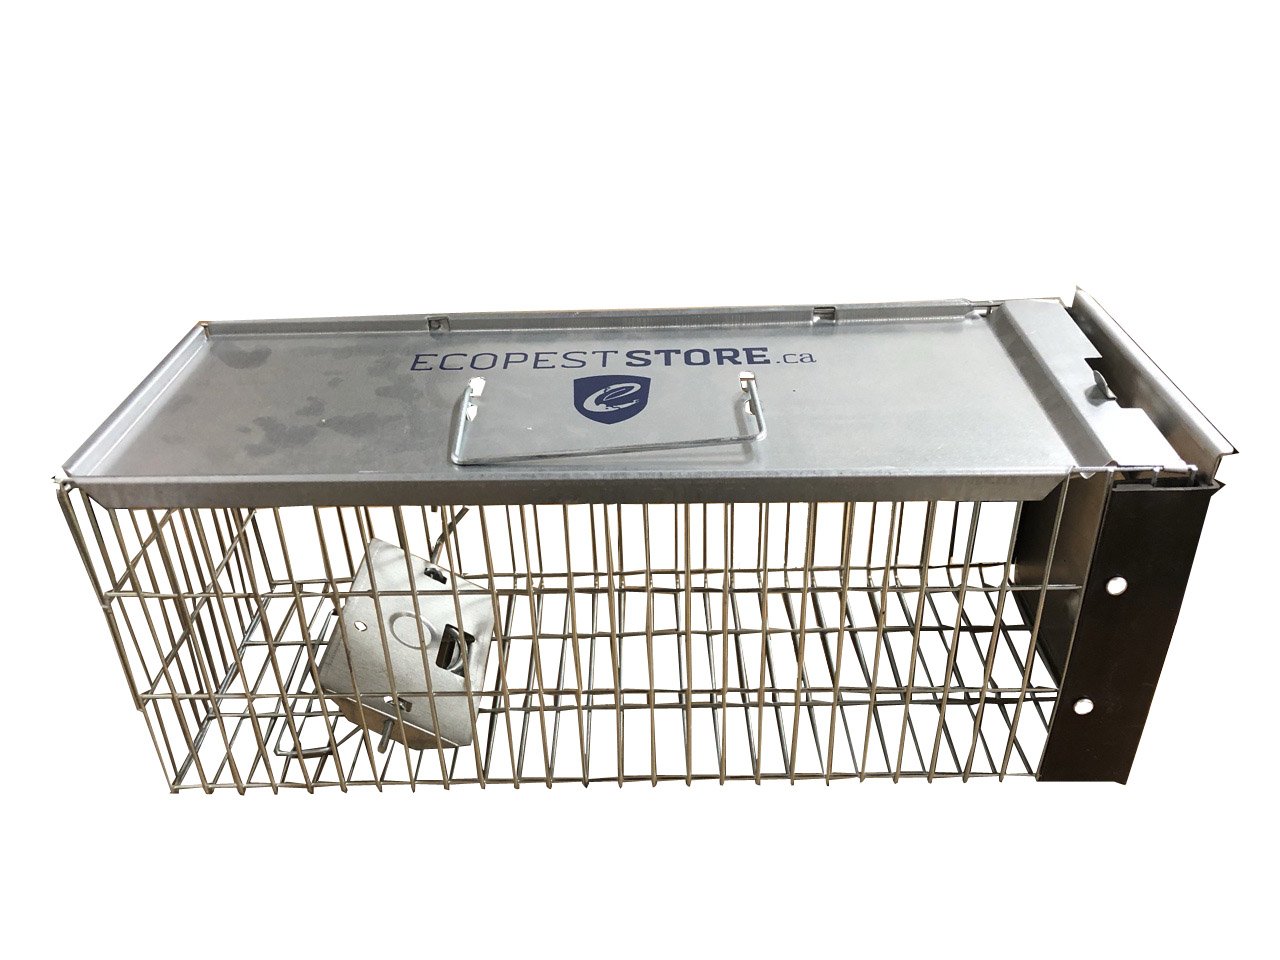 ECOPEST X-Small Professional Style One-Door Animal Trap for Chipmunks, Squirrels, Rats, and Weasels